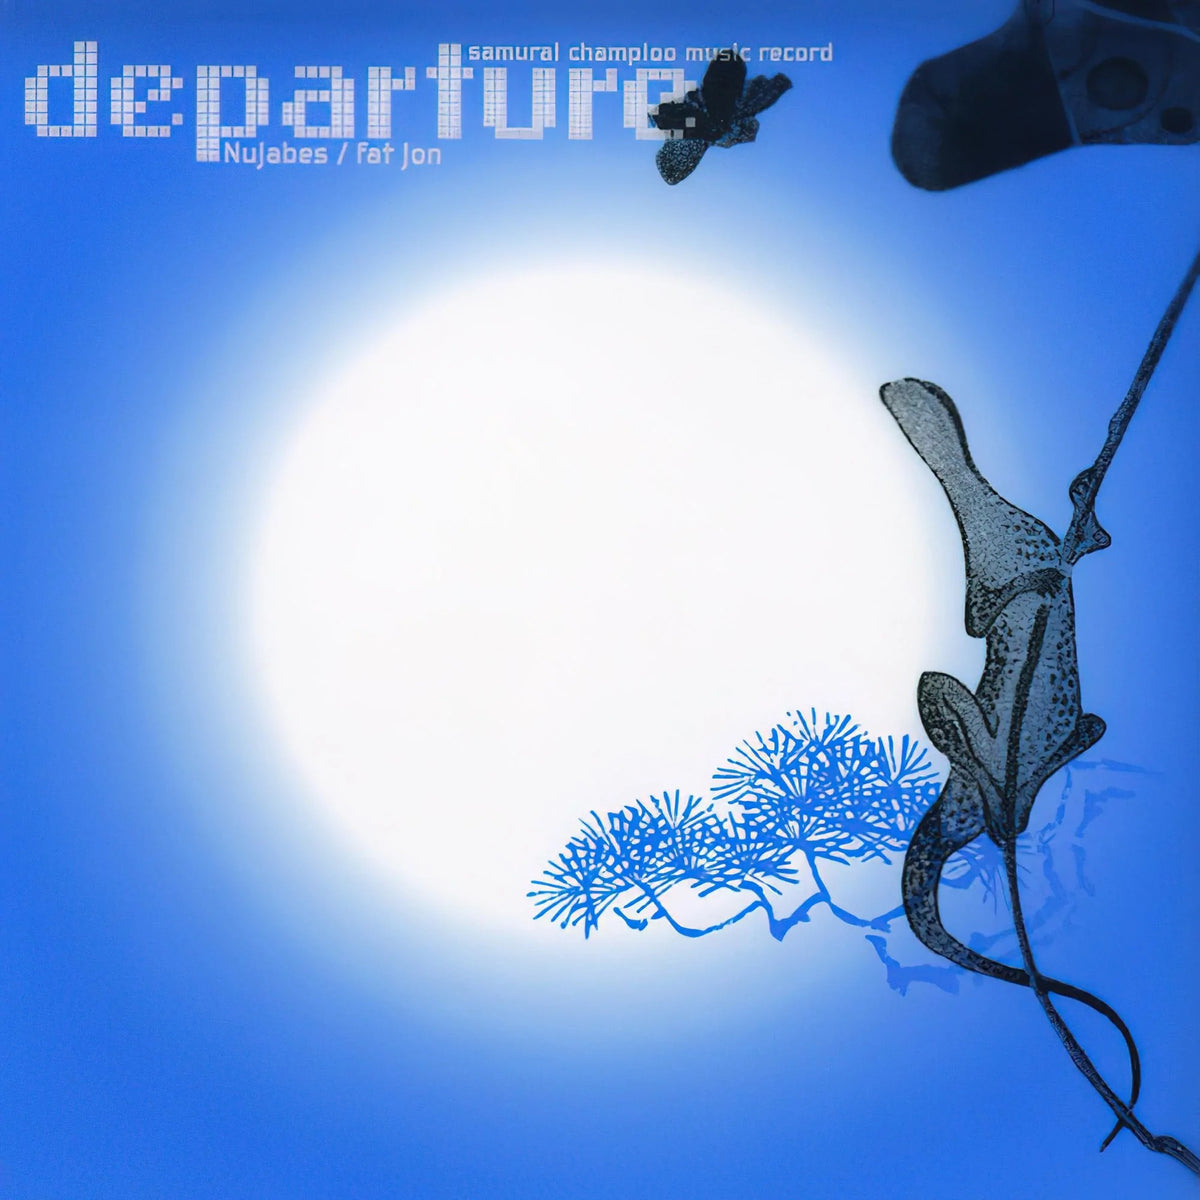 Samurai Champloo Music Record - Departure Soundtrack (Japan Pressing, Limited Edition, Nujabes, Fat Jon) 2LP